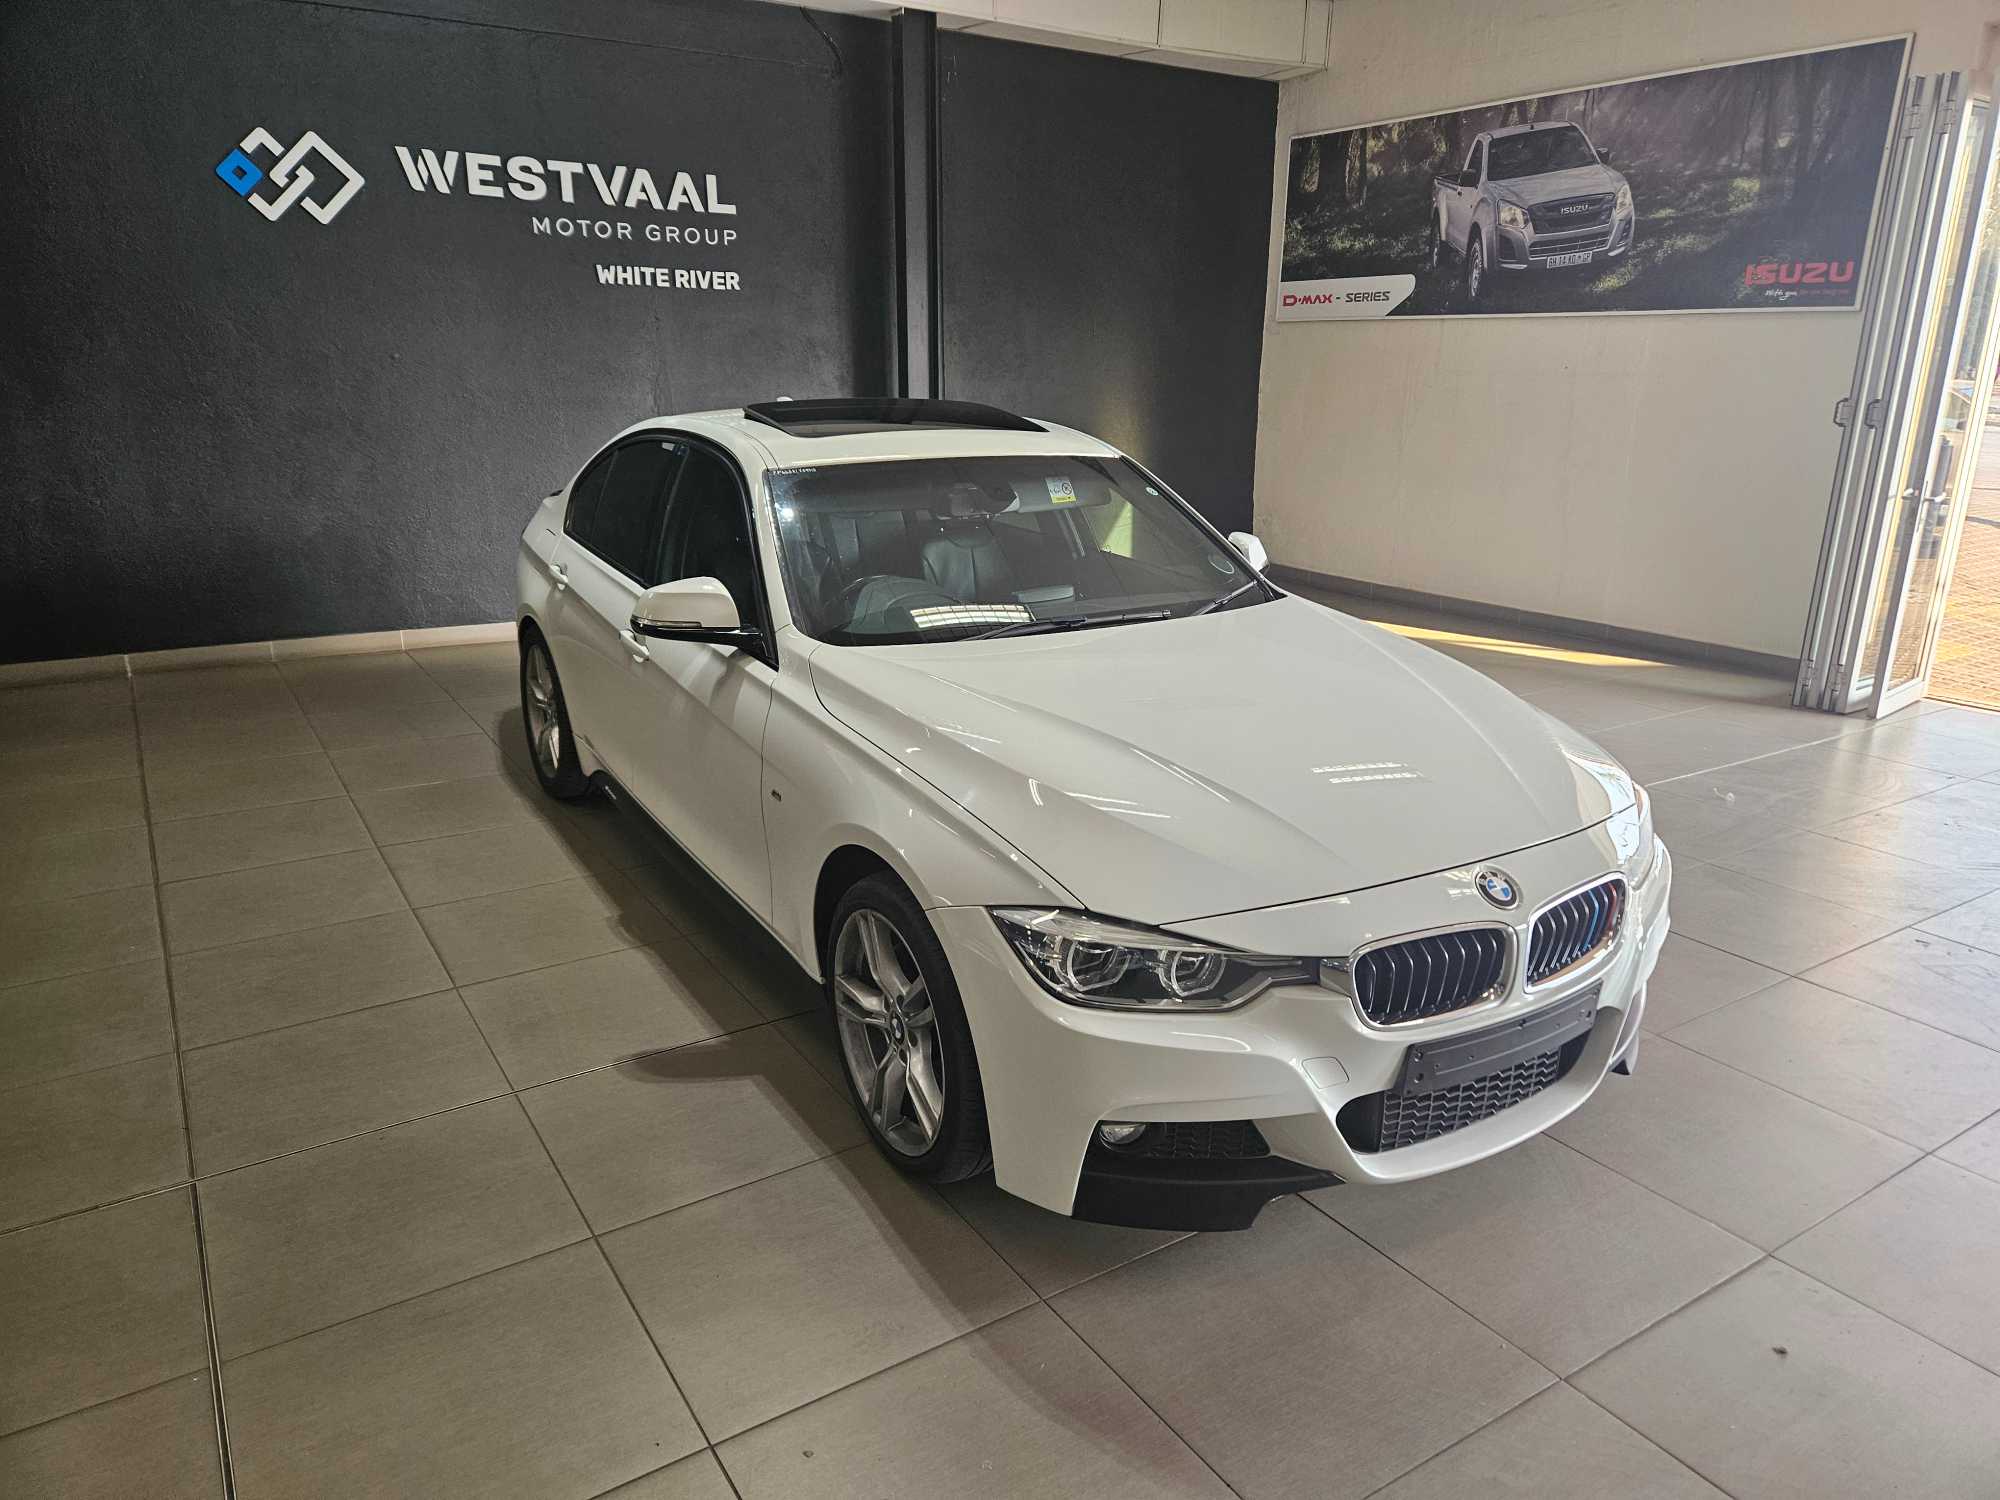 2018 BMW 320i M SPORT AT (F30)  for sale - WV046|USED|502298